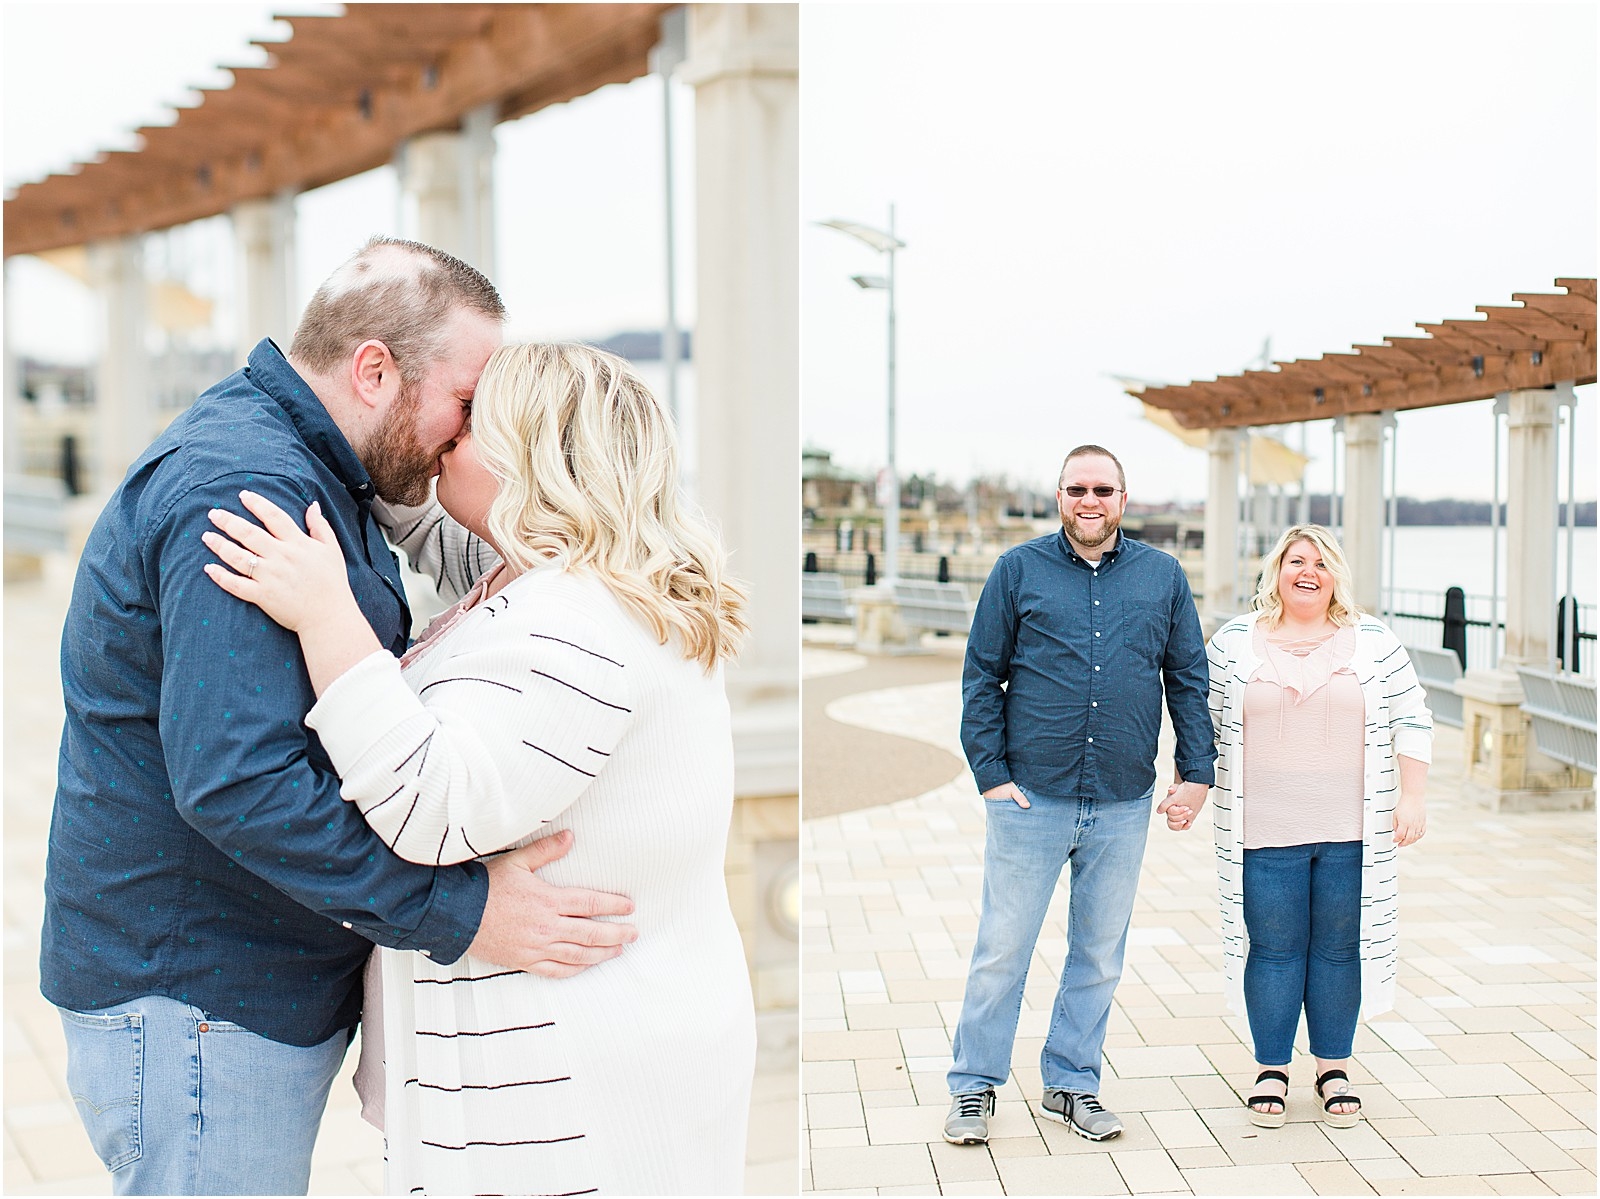 A Downtown Owensboro Engagement Session | Brittany and Neil | Engaged | | 0001.jpg